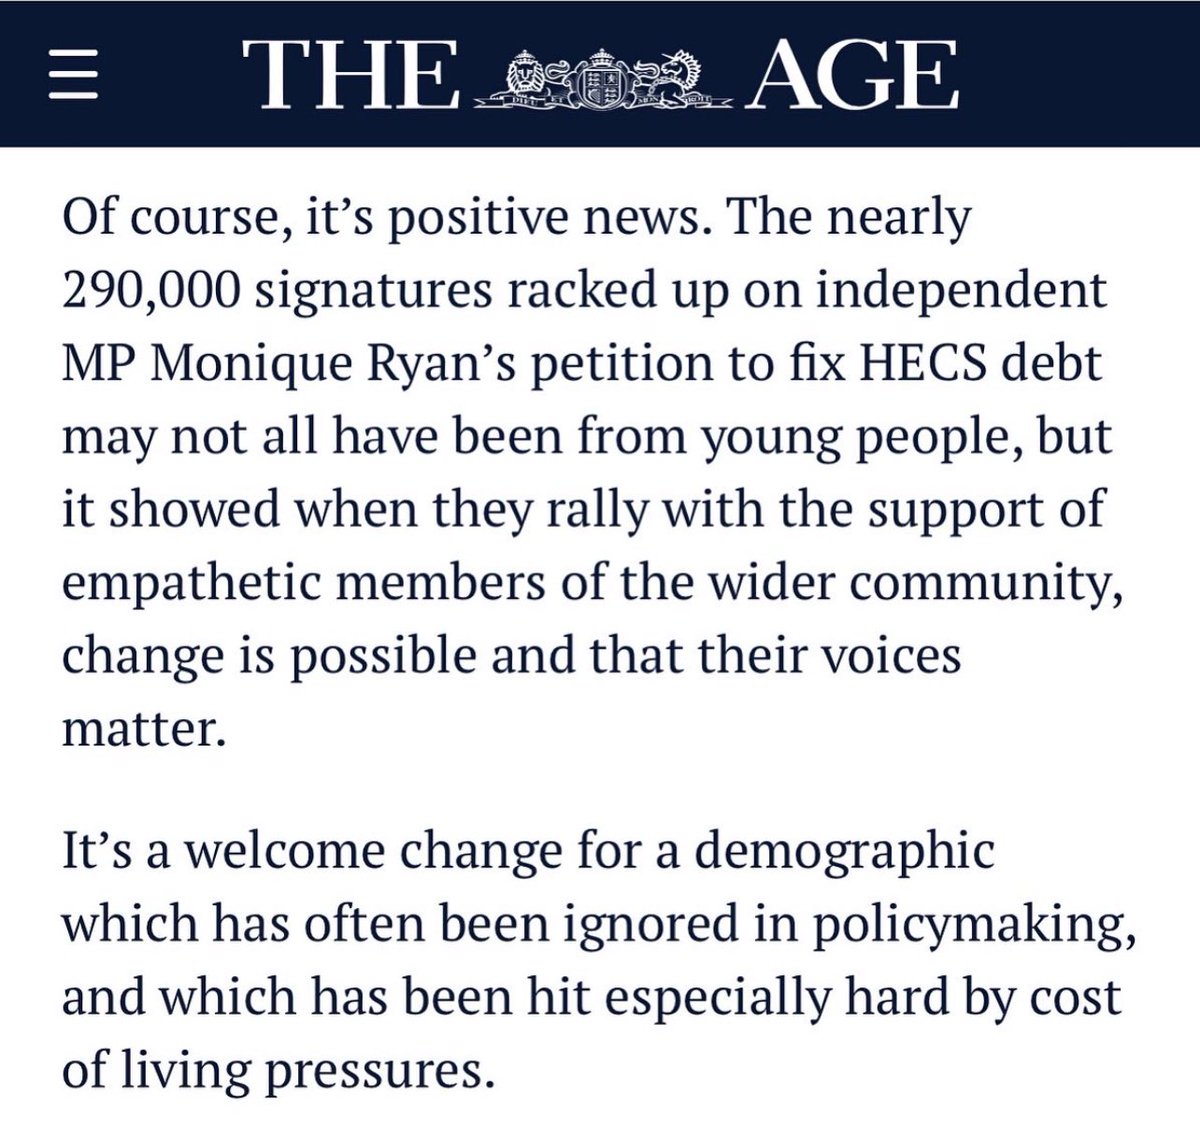 Thanks, the Age, for acknowledging that the action on HECS that we’ve seen in the last 24 hrs reflects the impact of communities and their representatives rallying together for positive change. There’s much more to do on HECS - this is just the start.